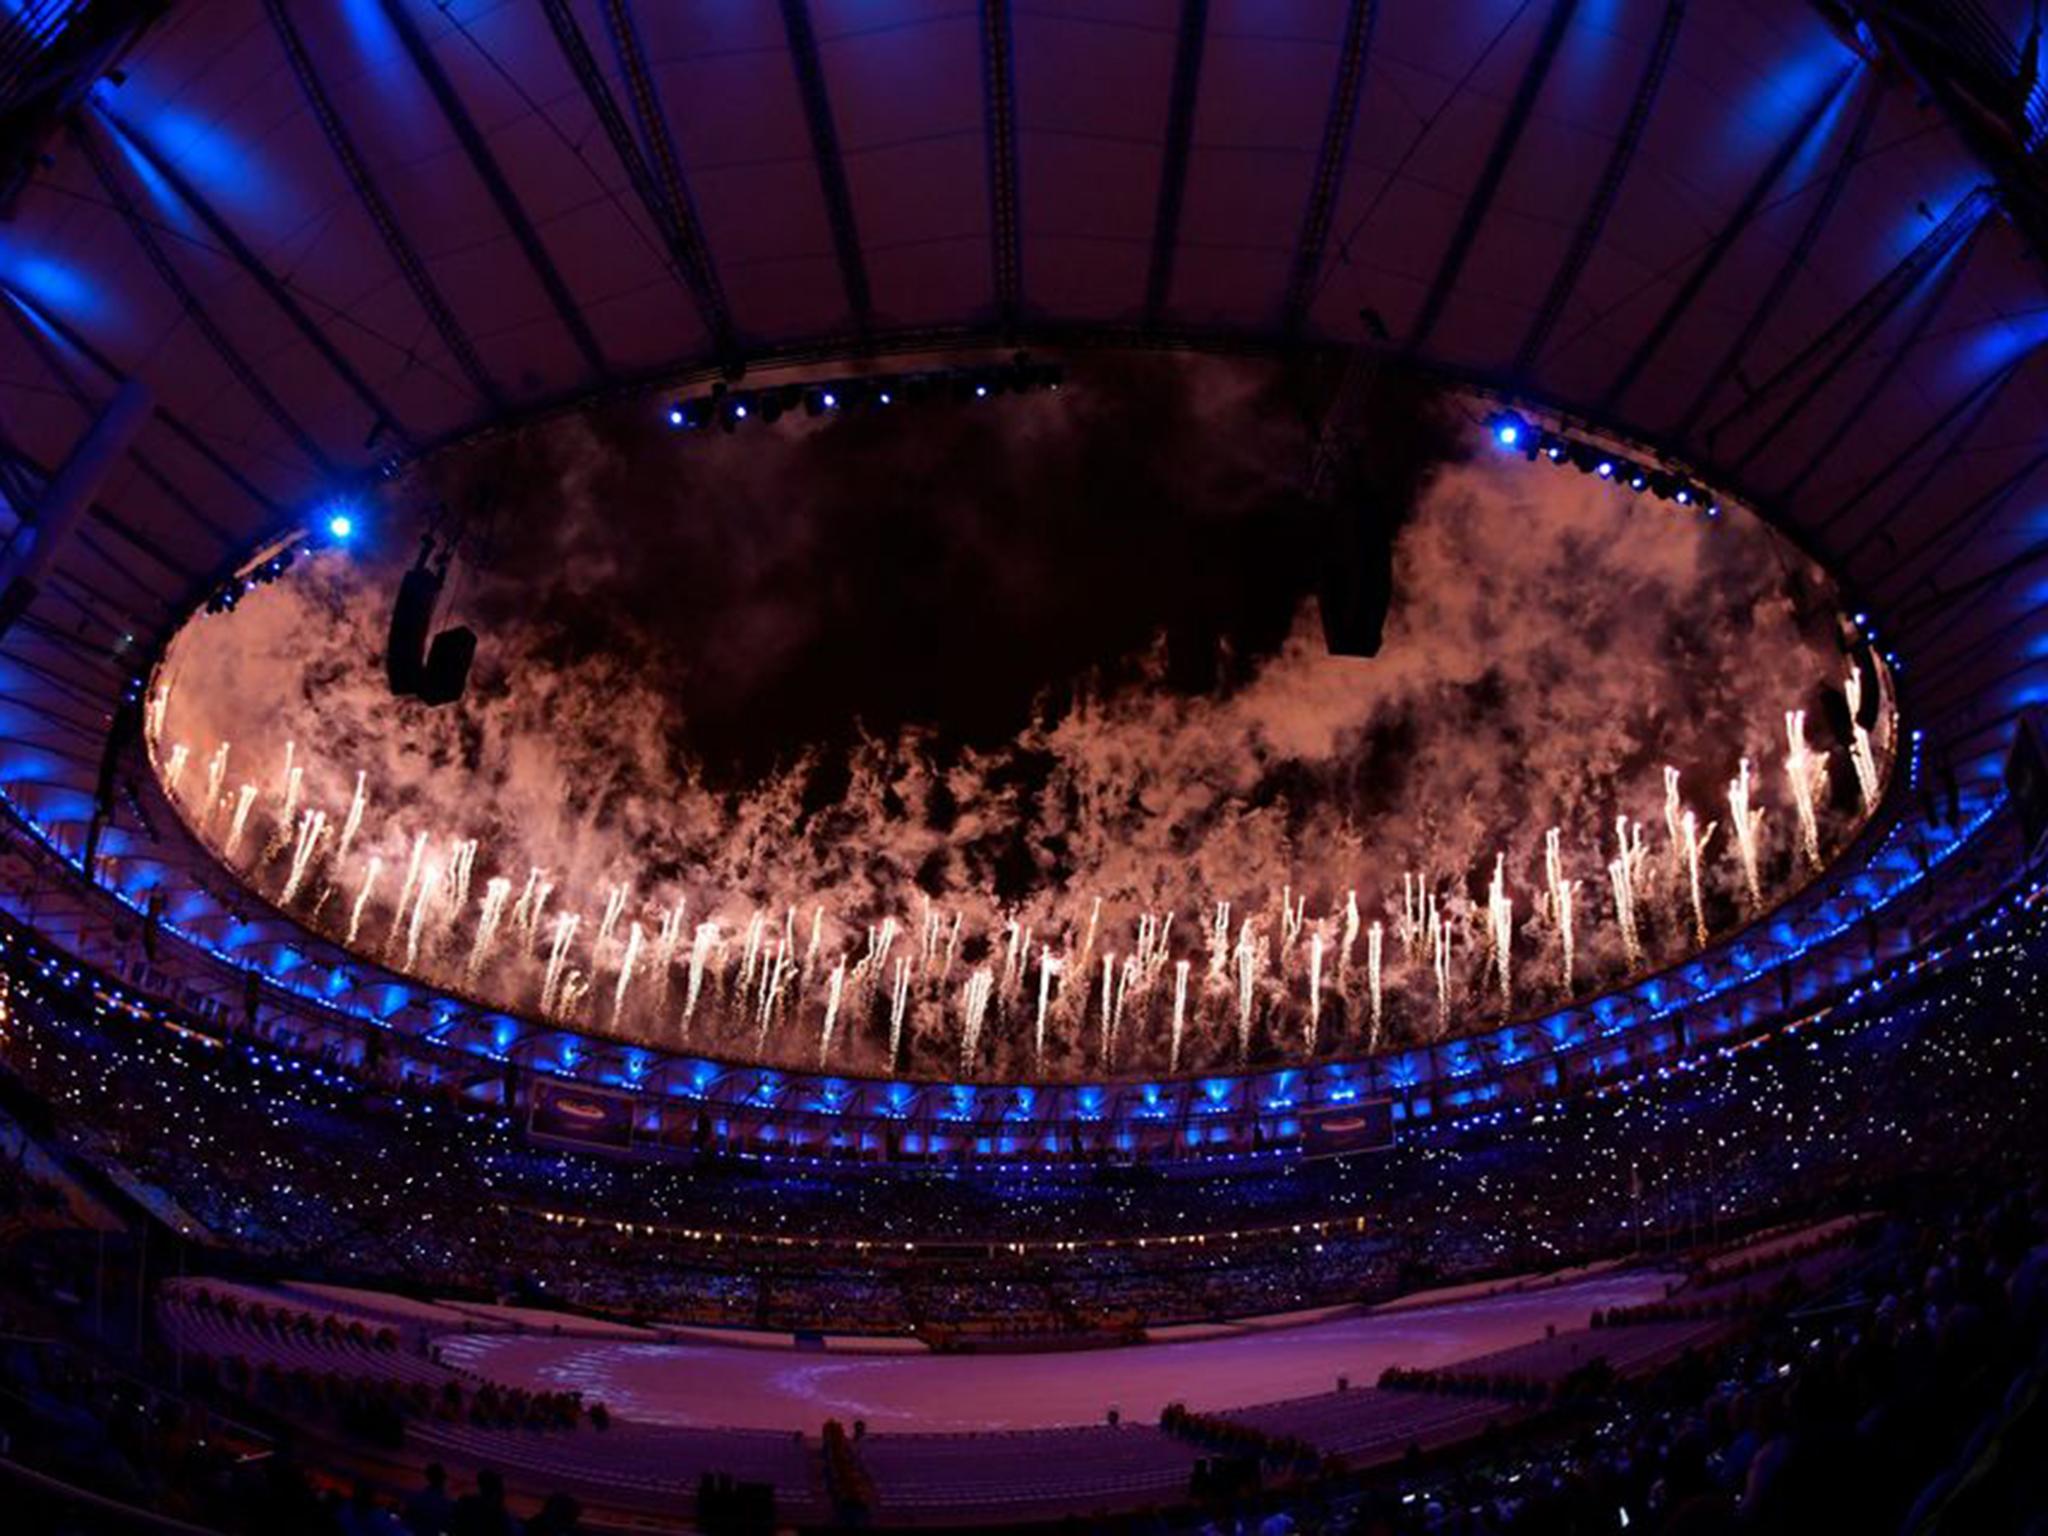 Fireworks light up the night sky at the Maracana Stadium in Rio during the closing ceremony